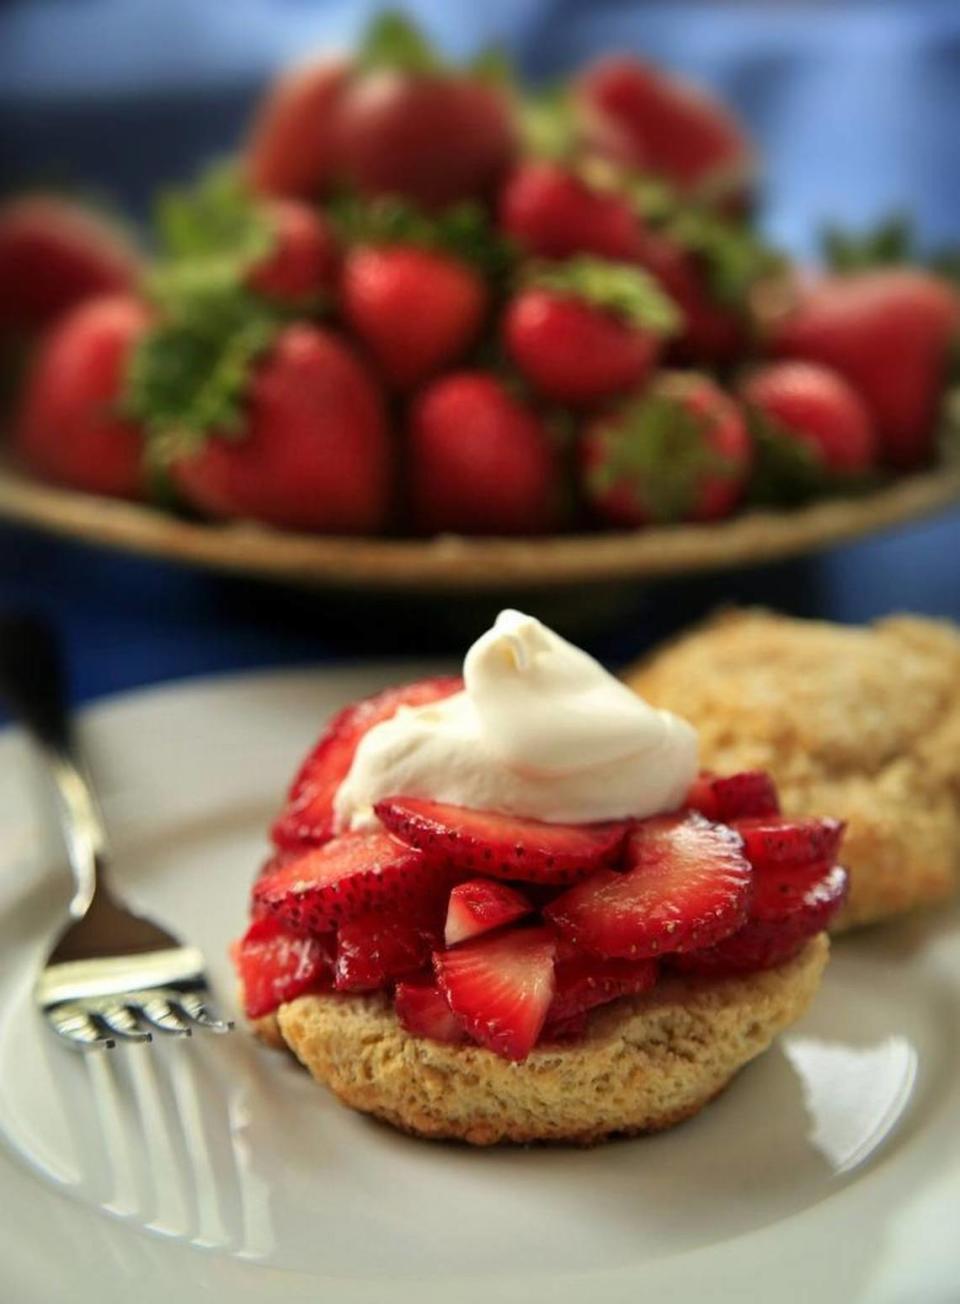 Strawberry shortcake is served with a dollop of whipped cream.